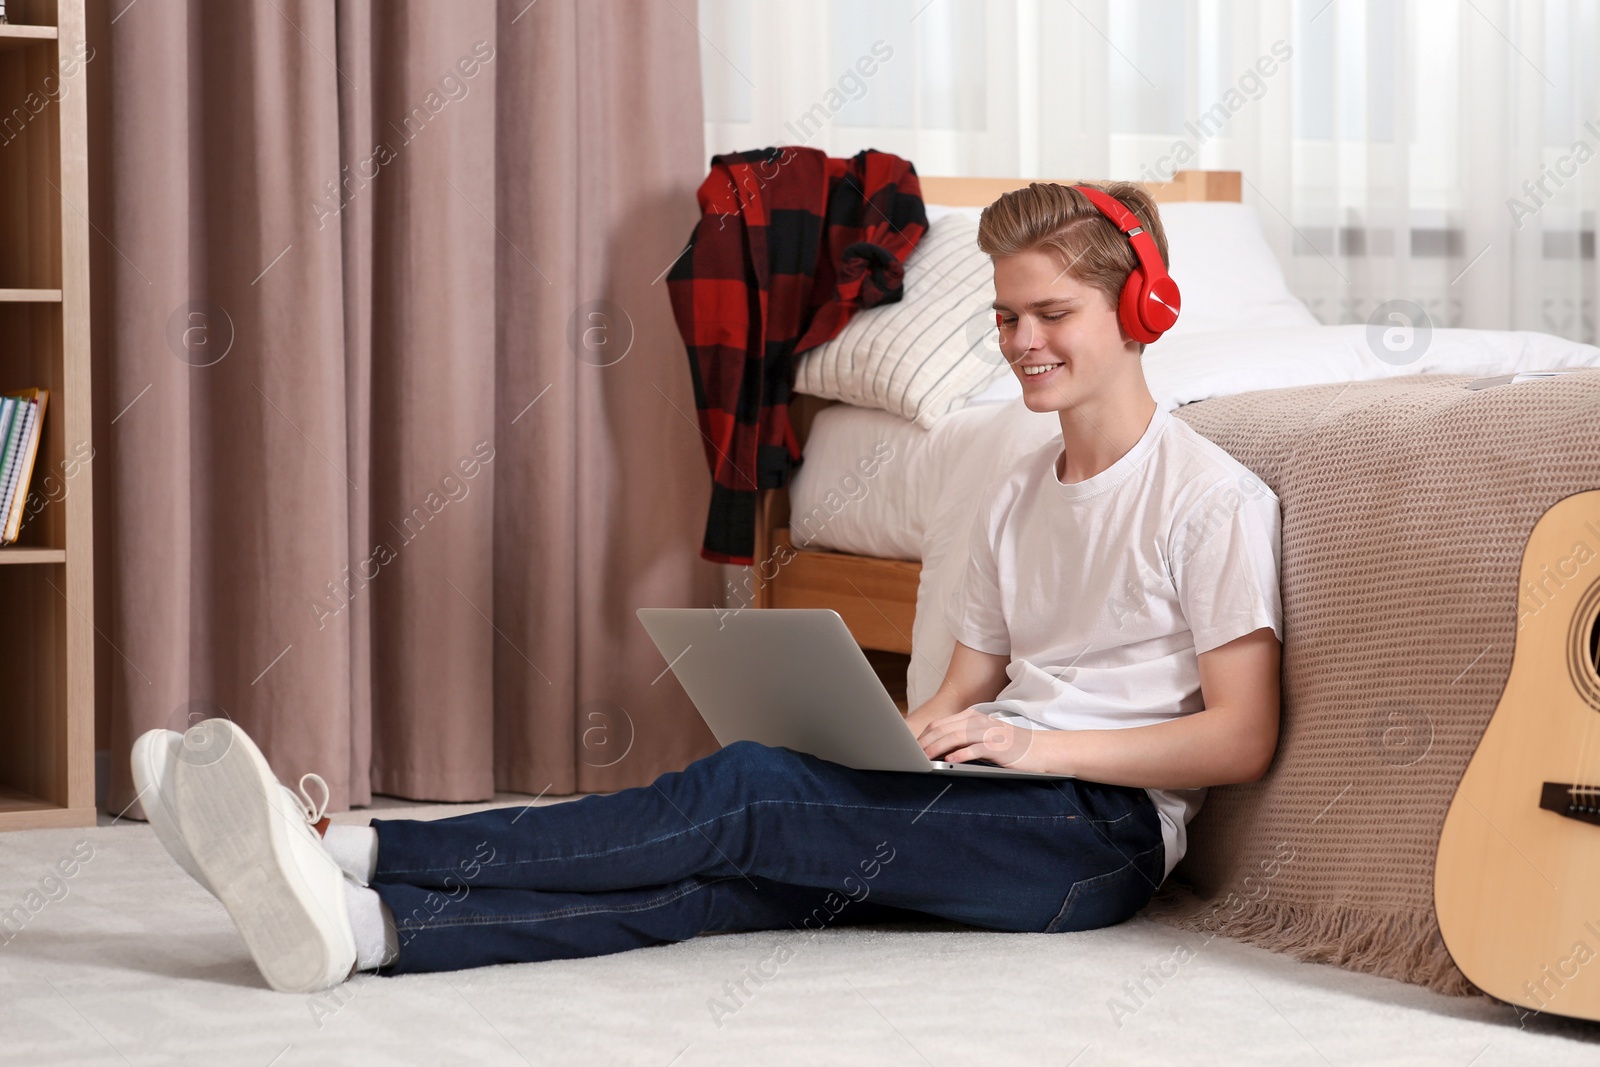 Photo of Online learning. Smiling teenage boy typing on laptop at home